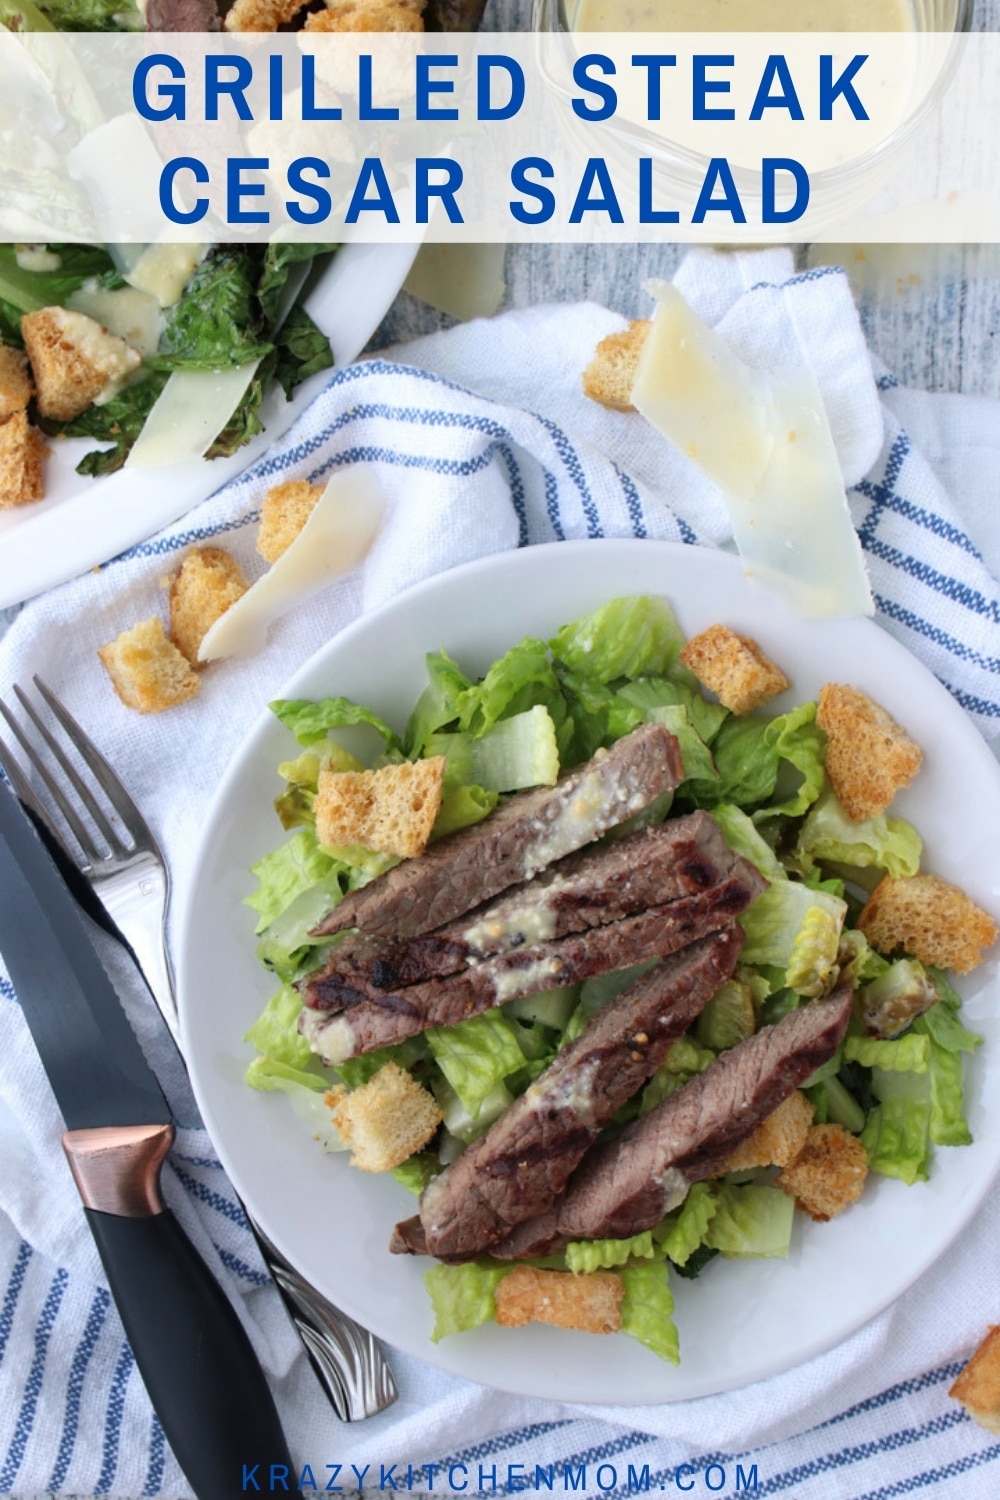 Turn a simple Cesar salad into an impressive dinner plater by using your BBQ grill or a simple stovetop grill pan.  via @krazykitchenmom